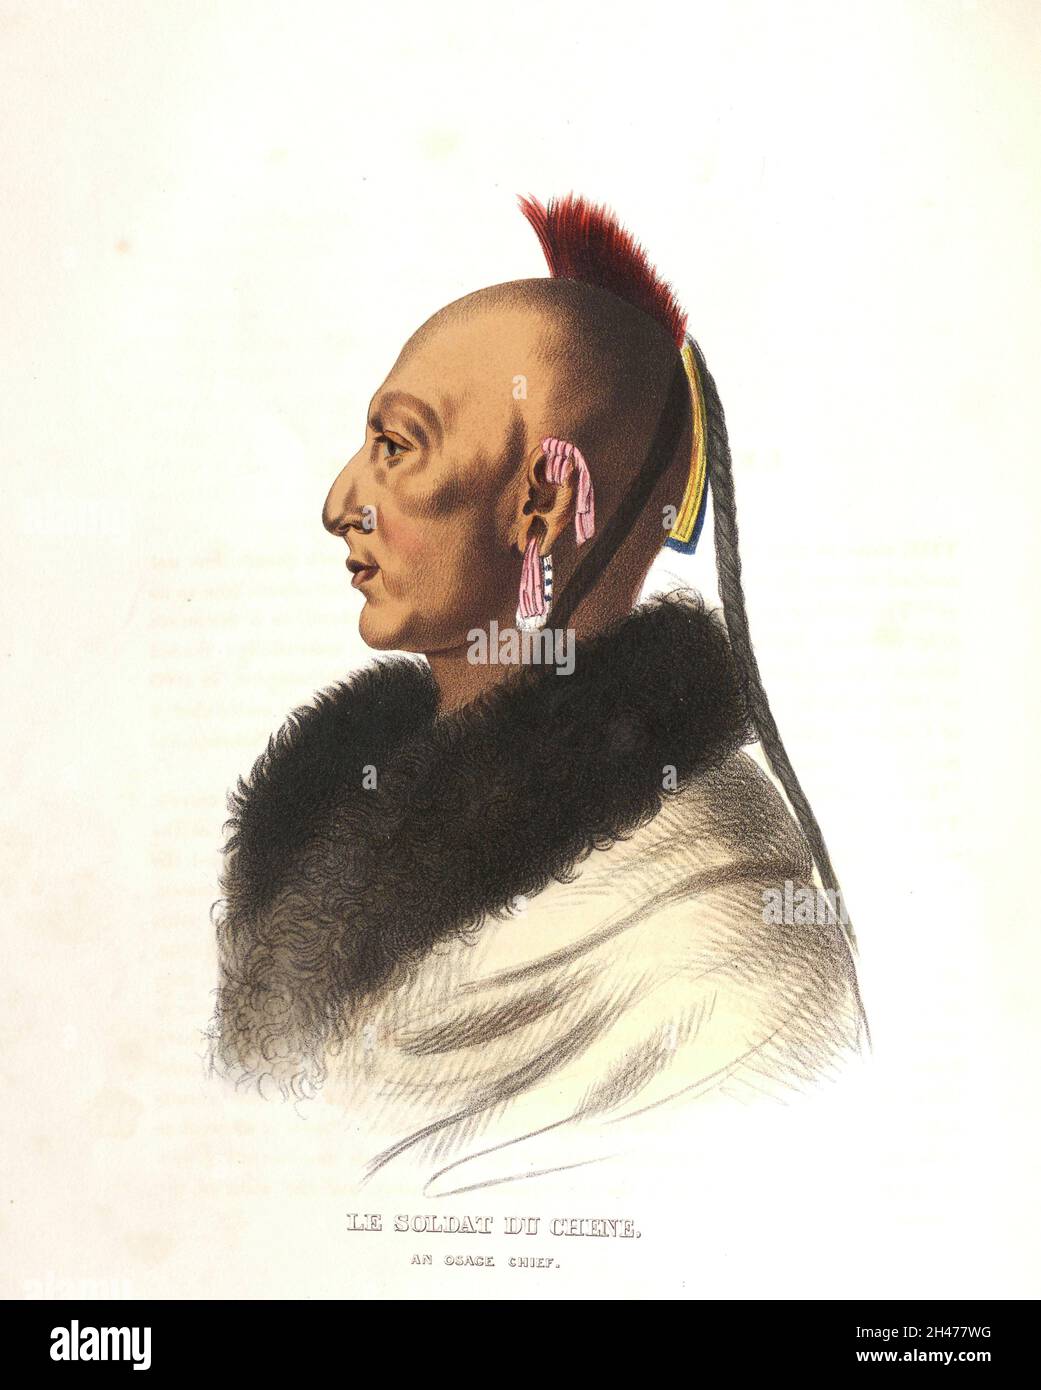 LE SOLDAT DU CHENE [The Soldier of the Oak] An Osage Chief from the book ' History of the Indian Tribes of North America with biographical sketches and anecdotes of the principal chiefs. ' Volume 2 of 3 by Thomas Loraine, McKenney, and James Hall Esq. Published in 1842 Painted by Charles Bird King Stock Photo